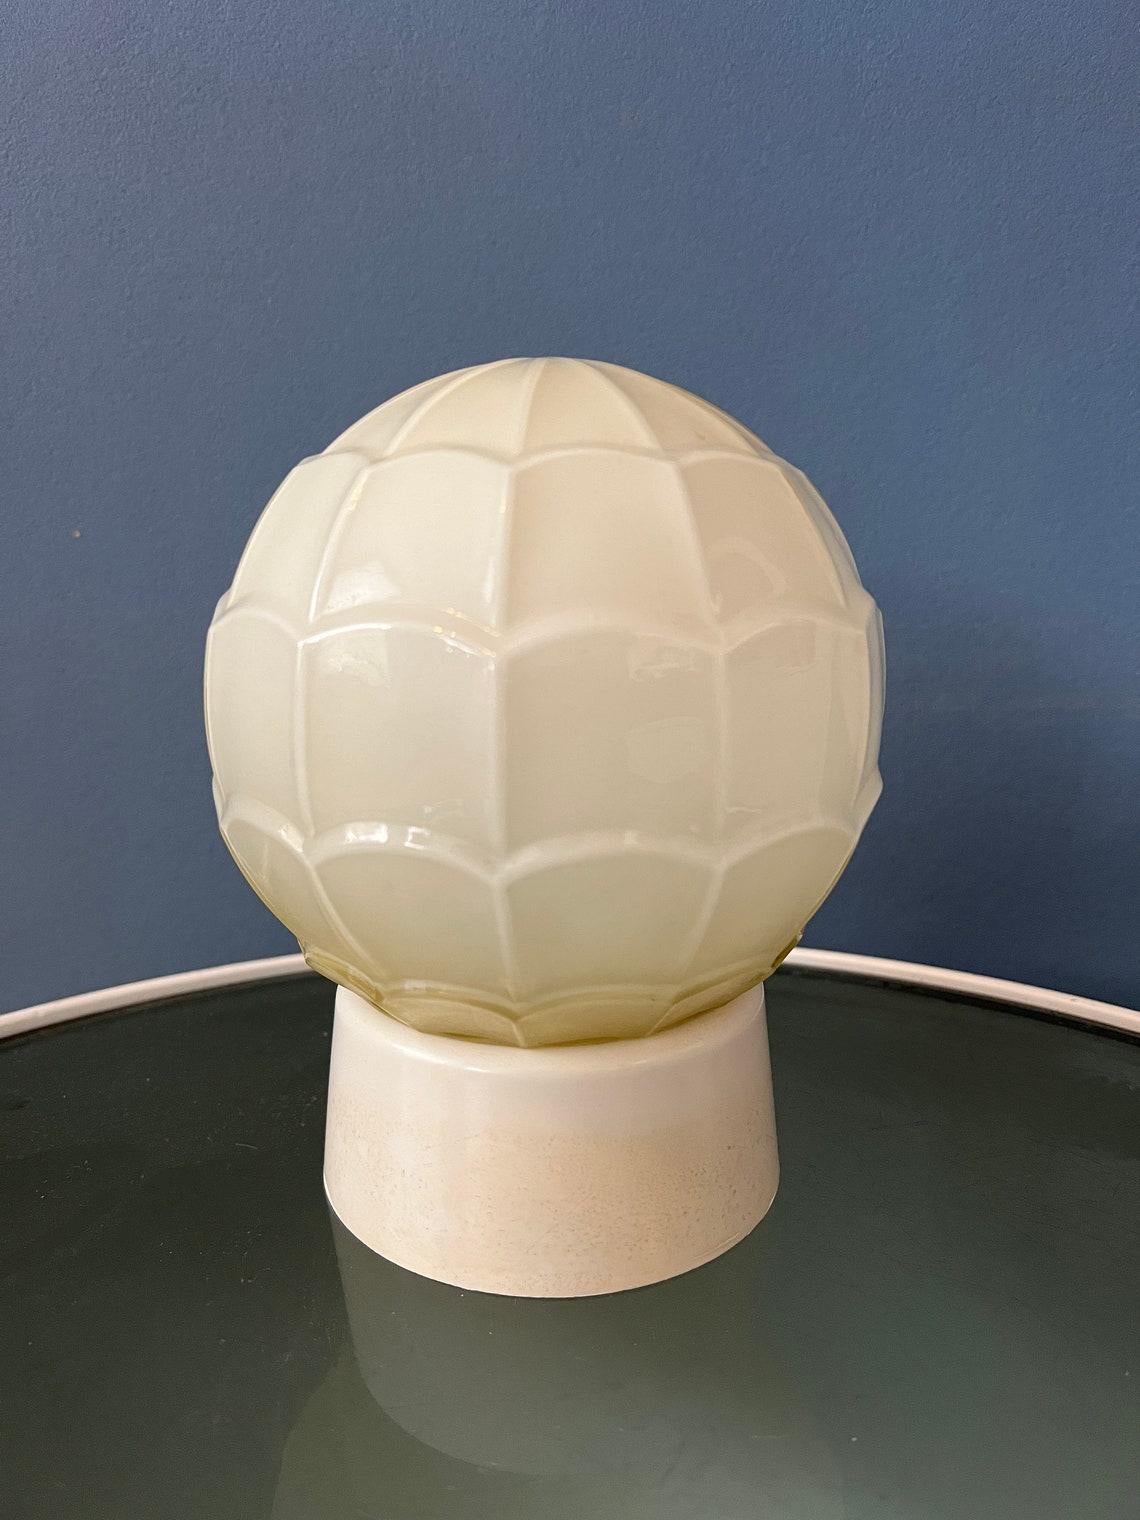 Cute beige thabur opaline glass ceiling lamp. The lamp requires an E14 lightbulb.

Additional information:
Materials: Glass, plastic
Period: 1970s
Dimensions:Height: 19 cm
Diameter: 15 cm
Condition: Very good. The lamp is still looking great, only